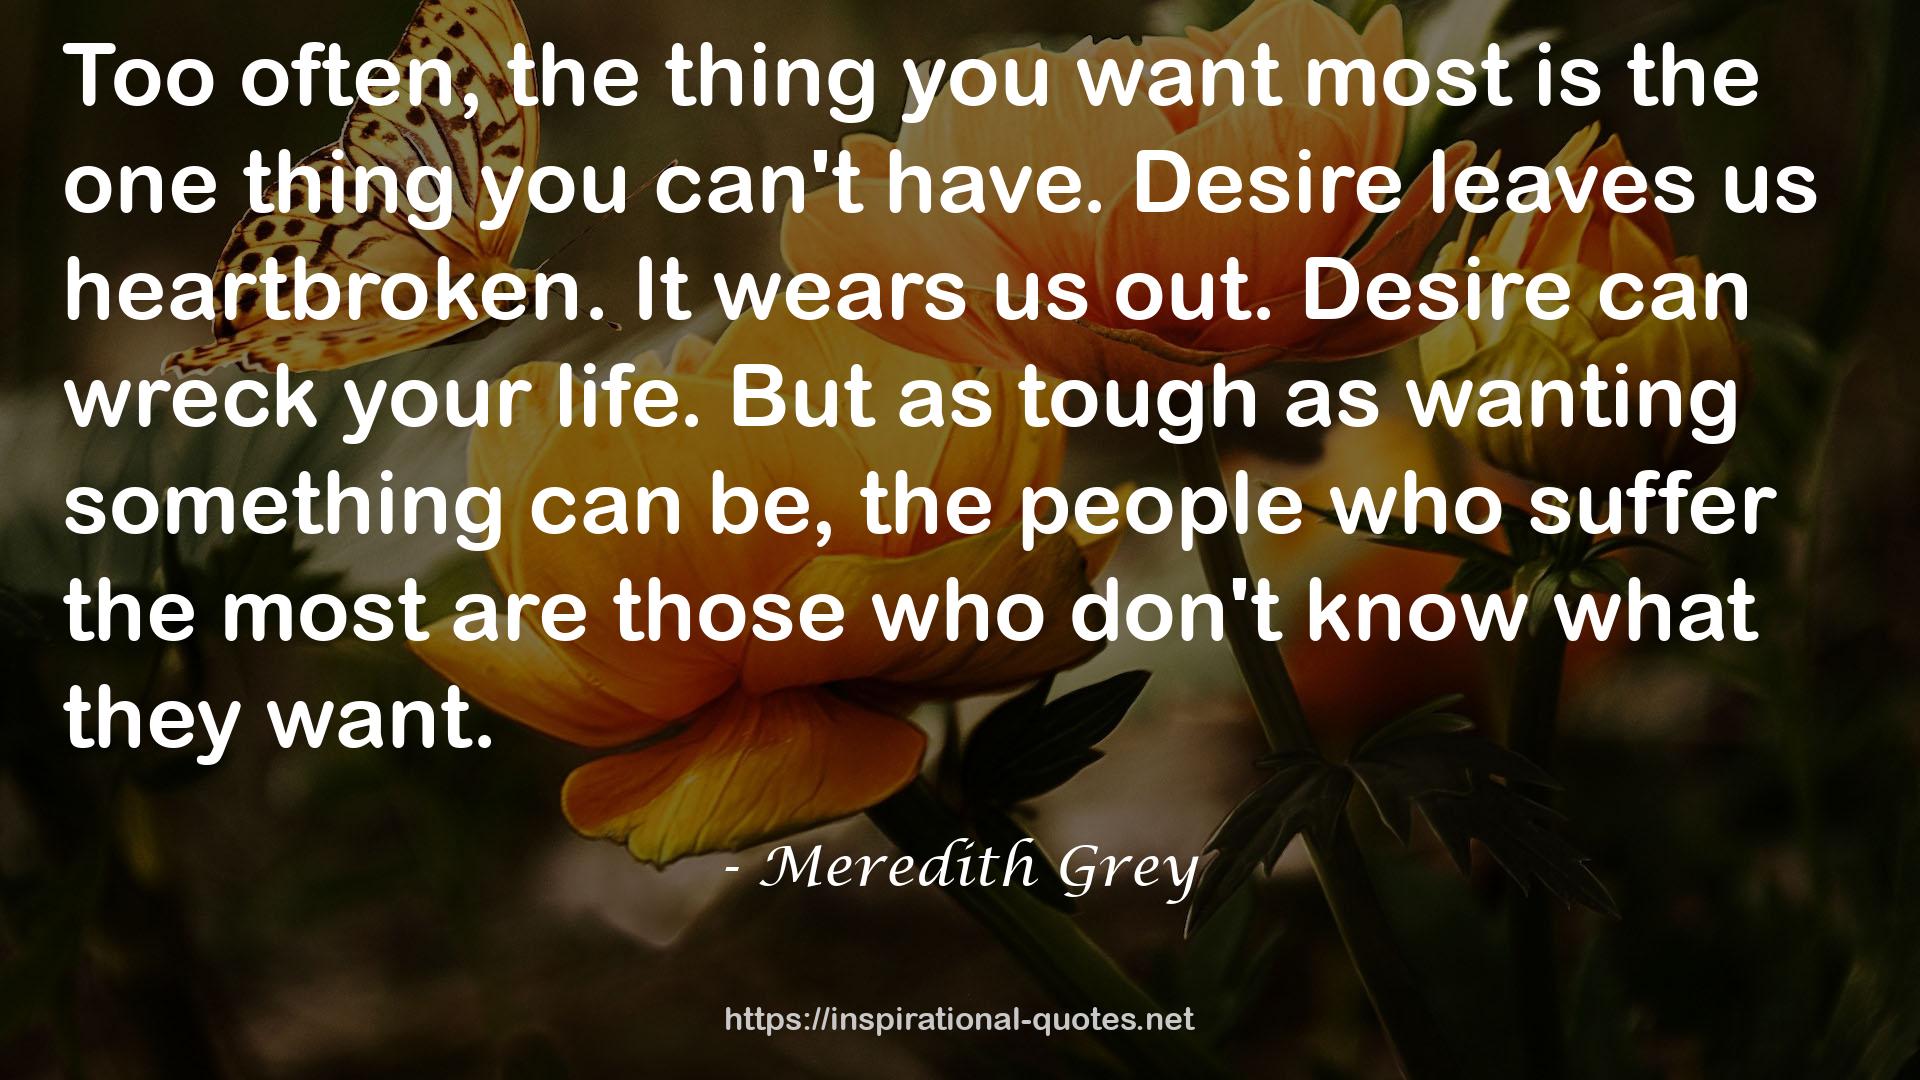 Meredith Grey QUOTES